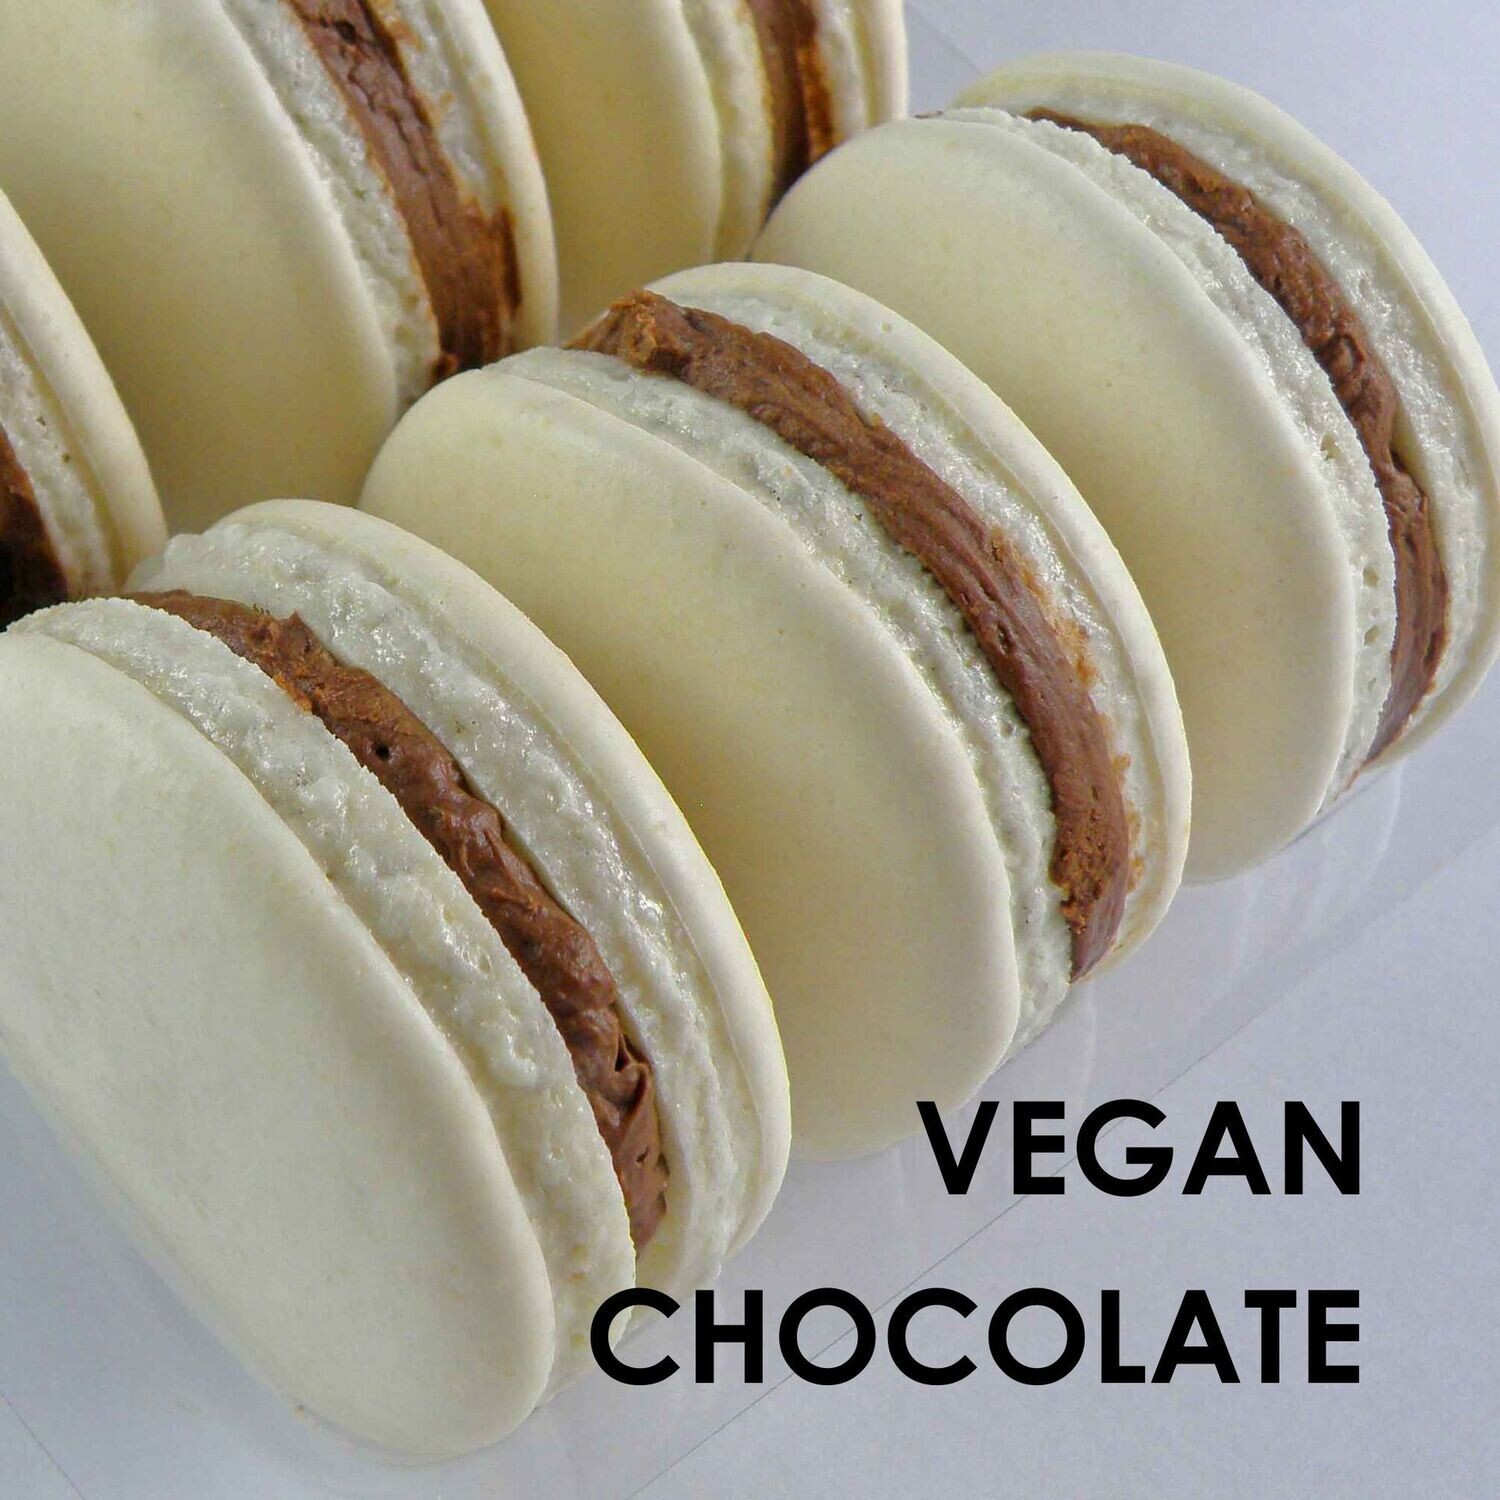 Vegan Macaroons (made with Aquafaba) - gift box of 20 (we select the flavours)